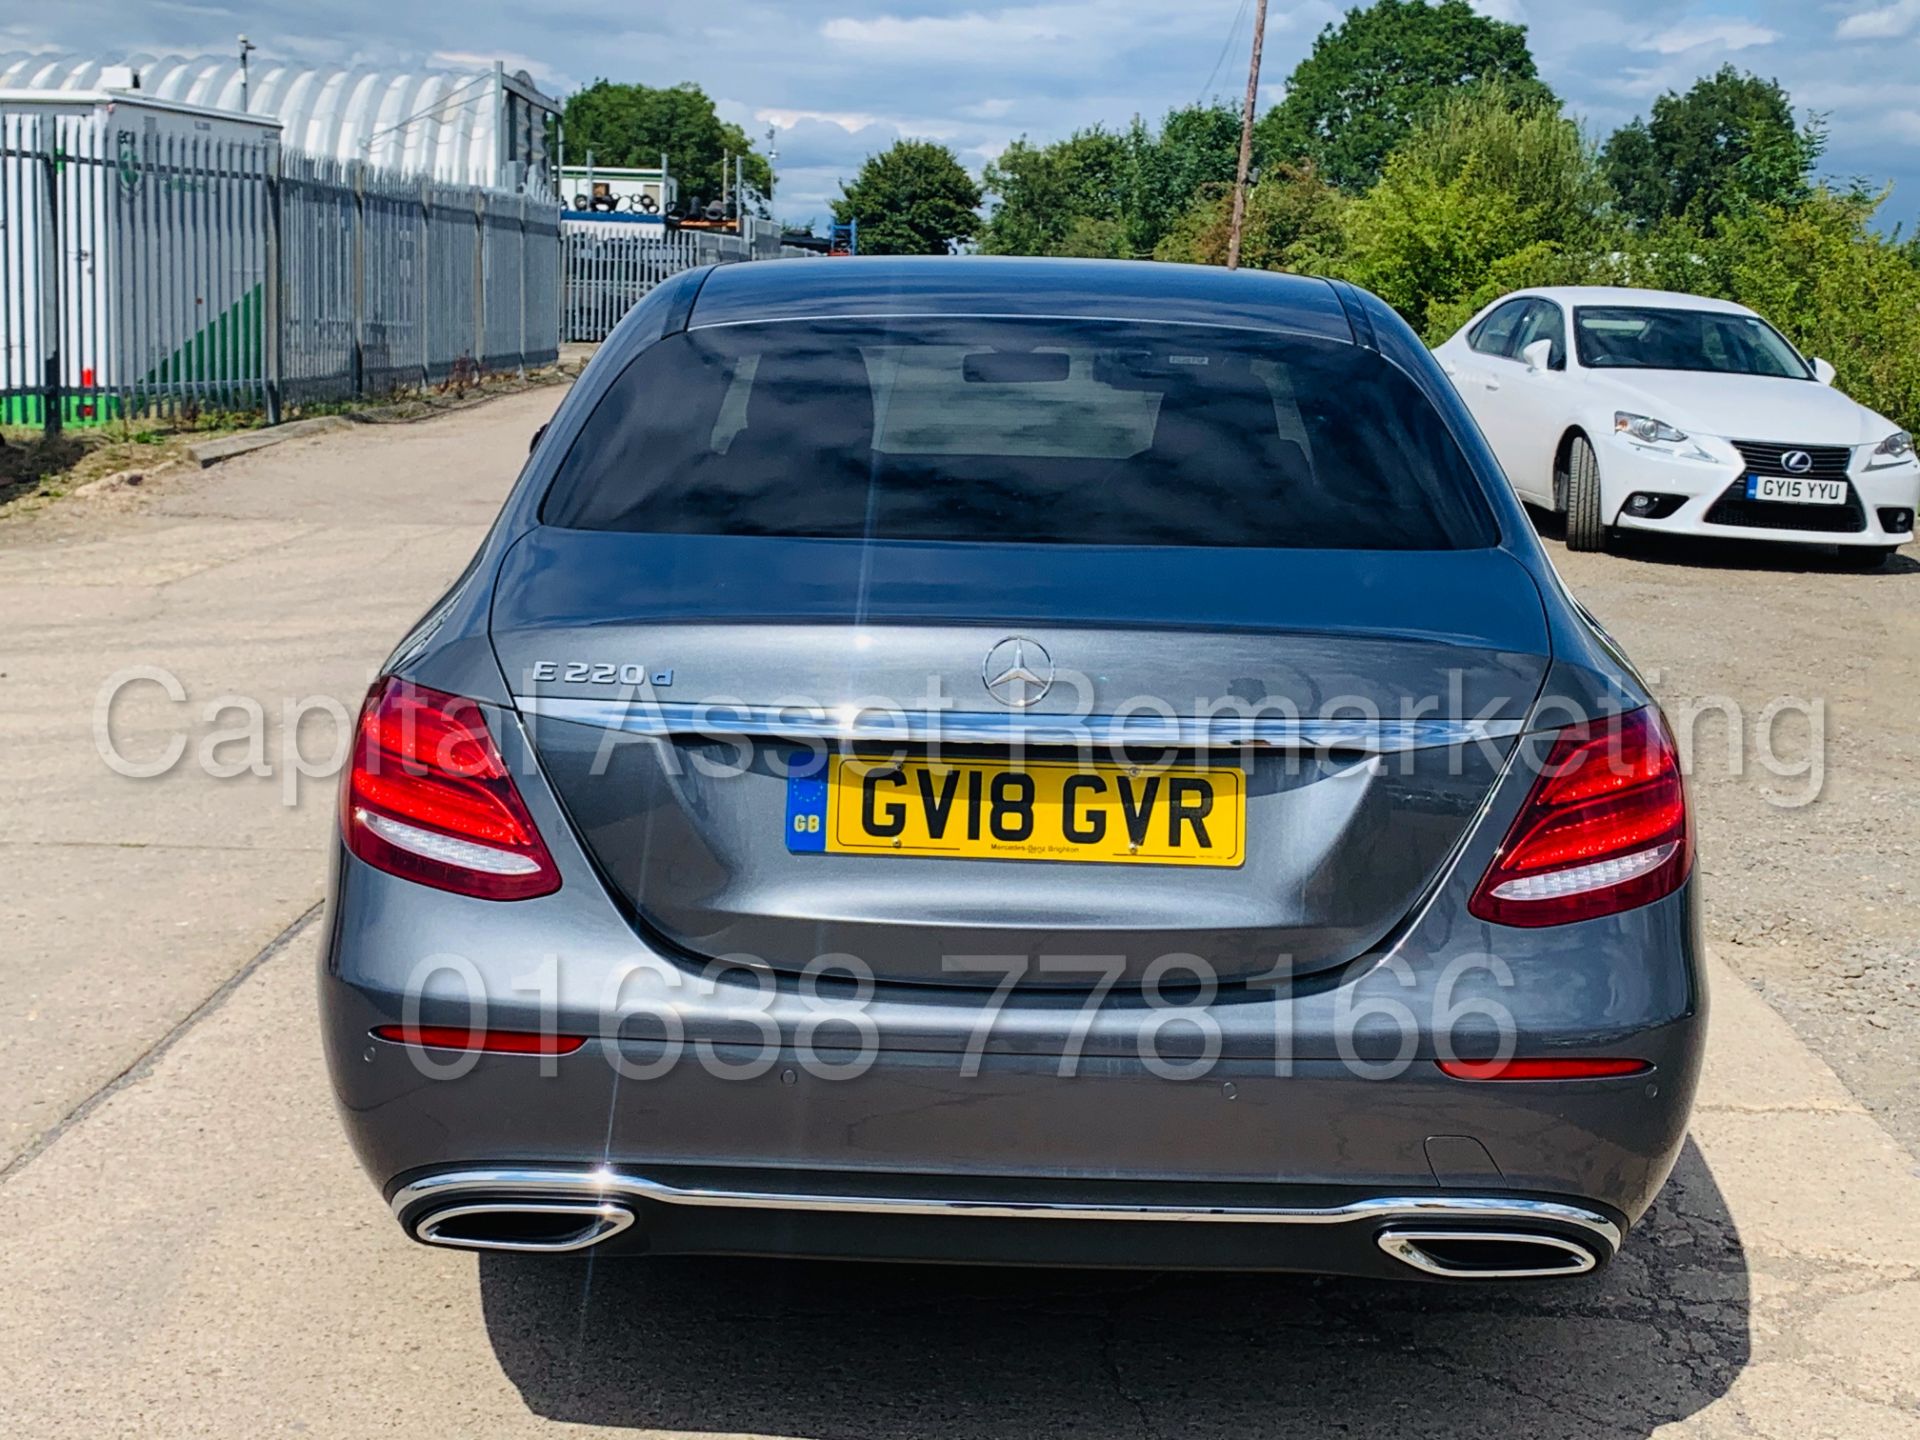 (On Sale) MERCEDES-BENZ E220D *SALOON* (2018 - NEW MODEL) '9-G TRONIC AUTO - LEATHER - SAT NAV' - Image 11 of 56